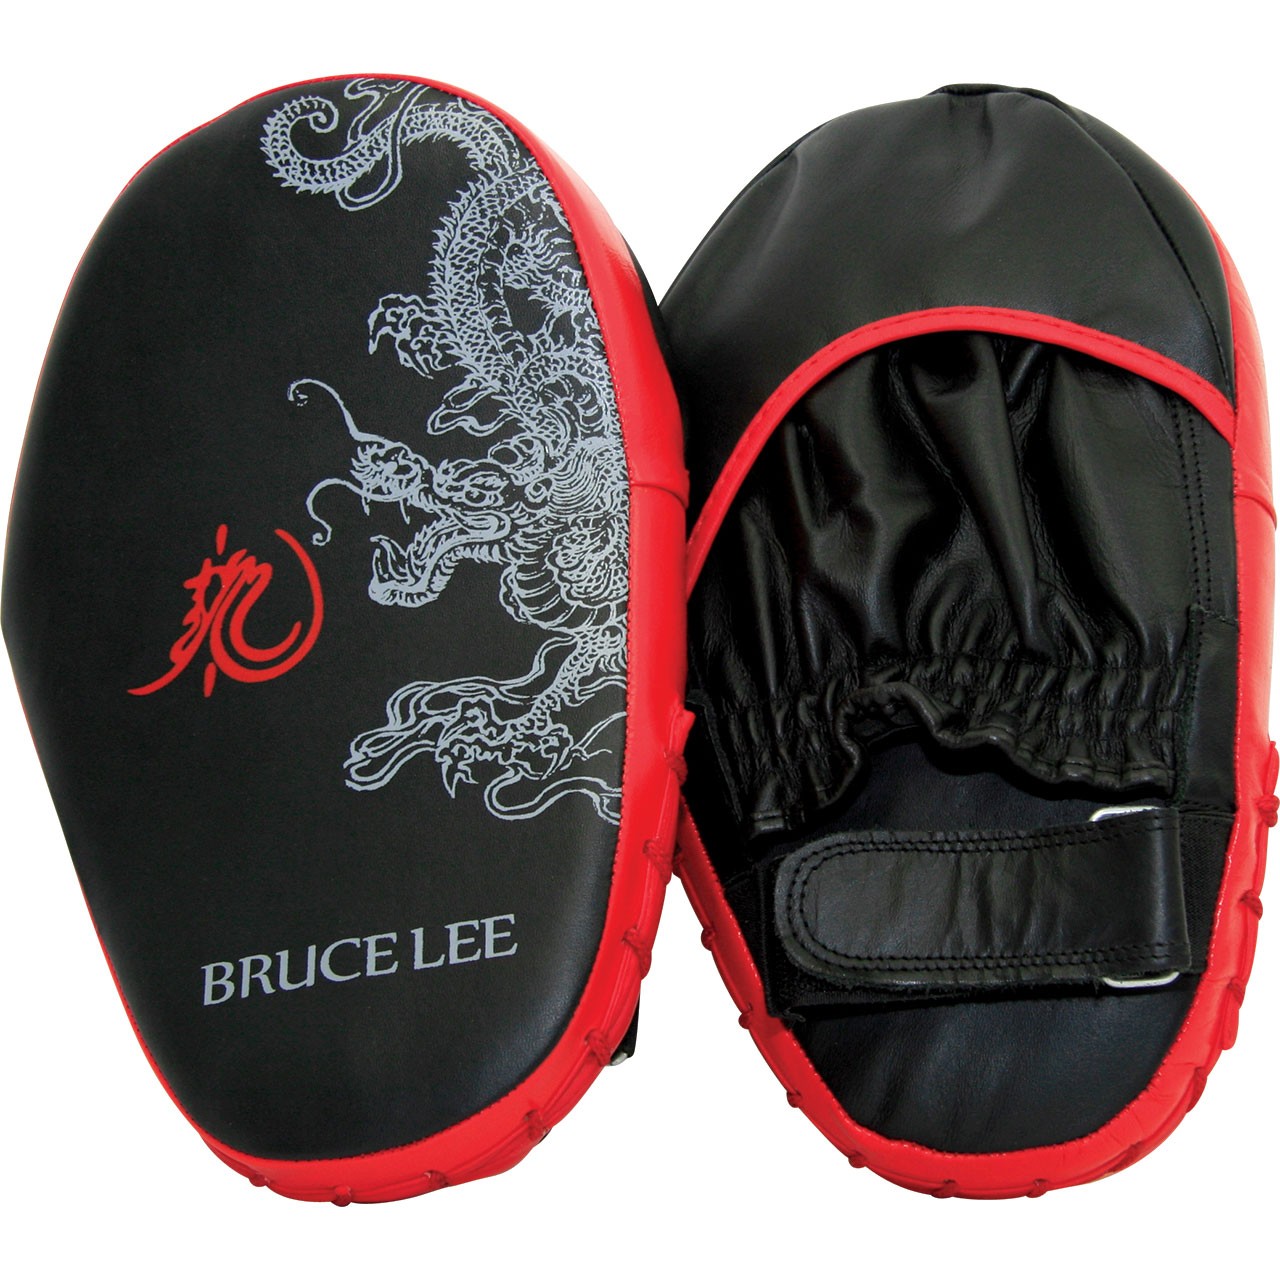 Bruce Lee Deluxe Coaching Mitts